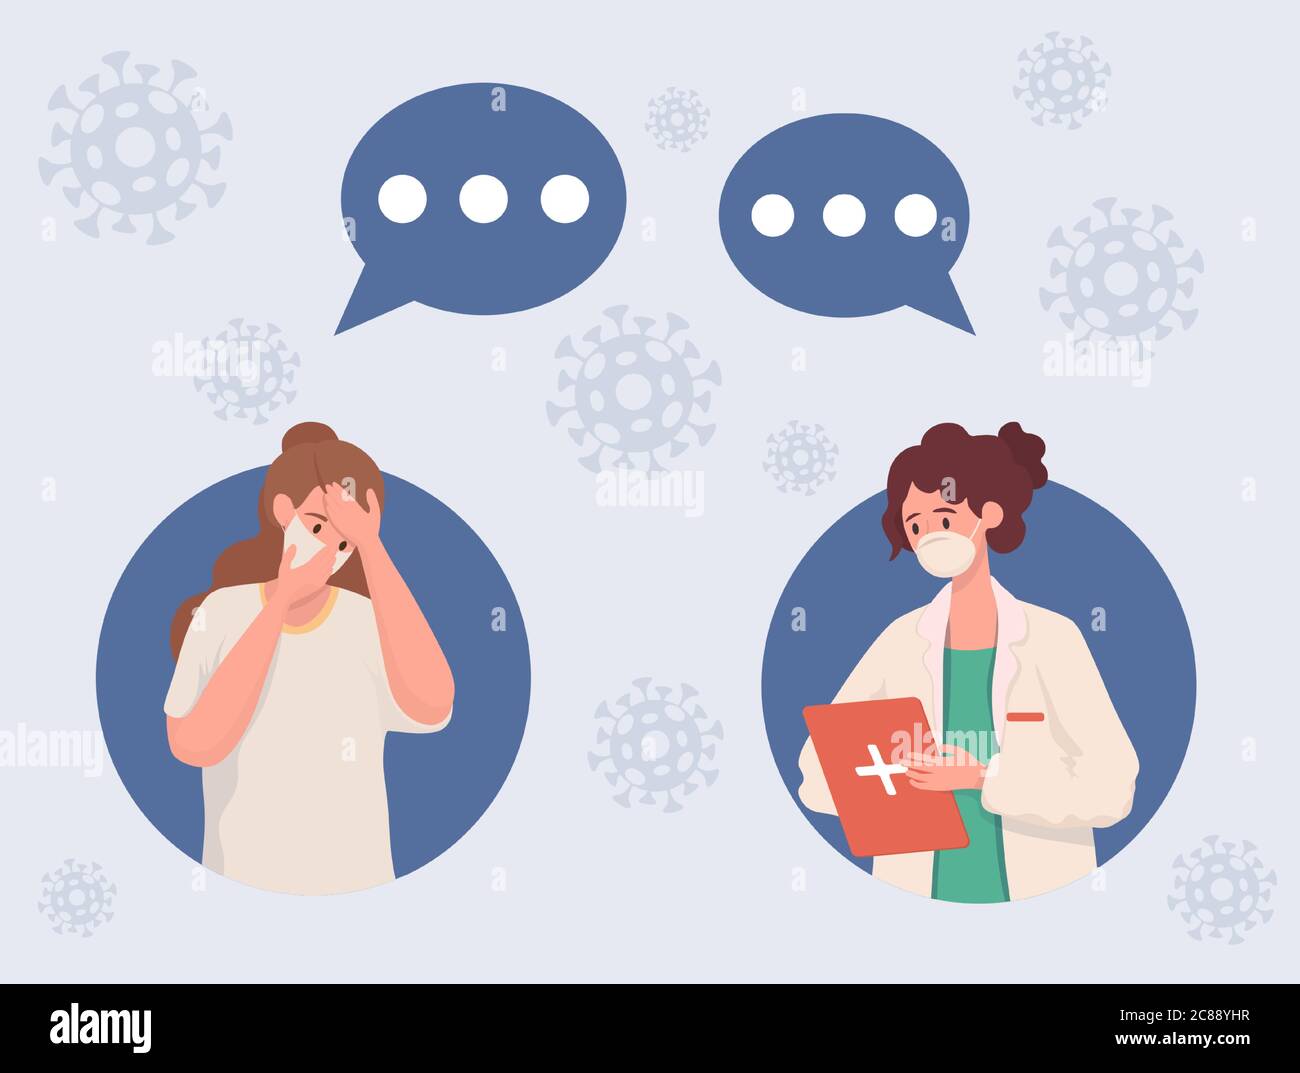 Young woman infected with Coronavirus calling doctor vector flat illustration. If you have Covid-19 symptoms call doctor concept. Nurse and woman speak with communication speech bubbles. Stock Vector